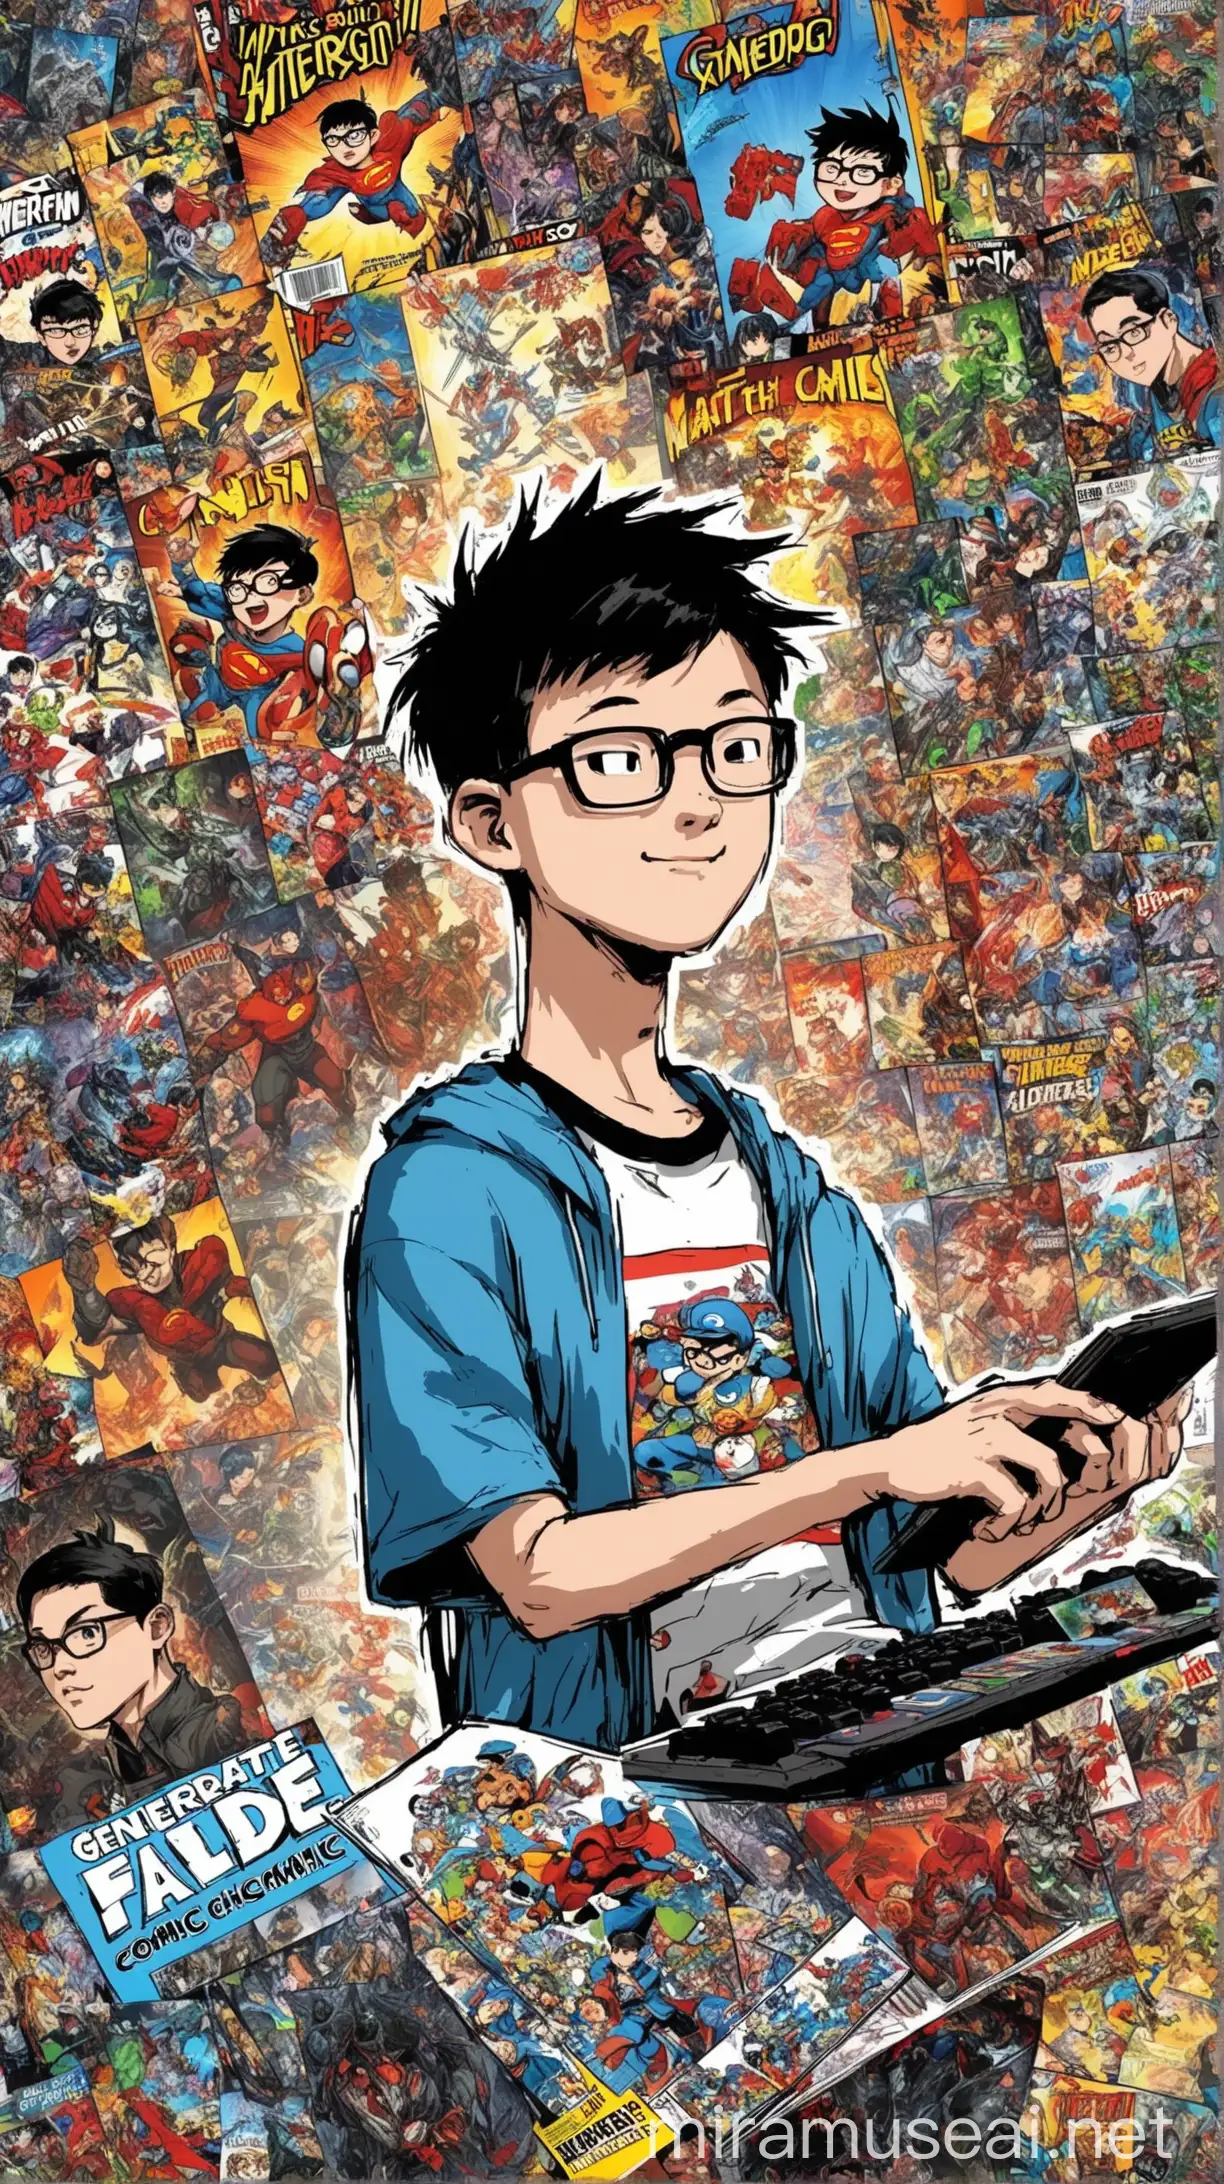 Nerdy ChineseAmerican Teen Fusion of Comics Games and Music